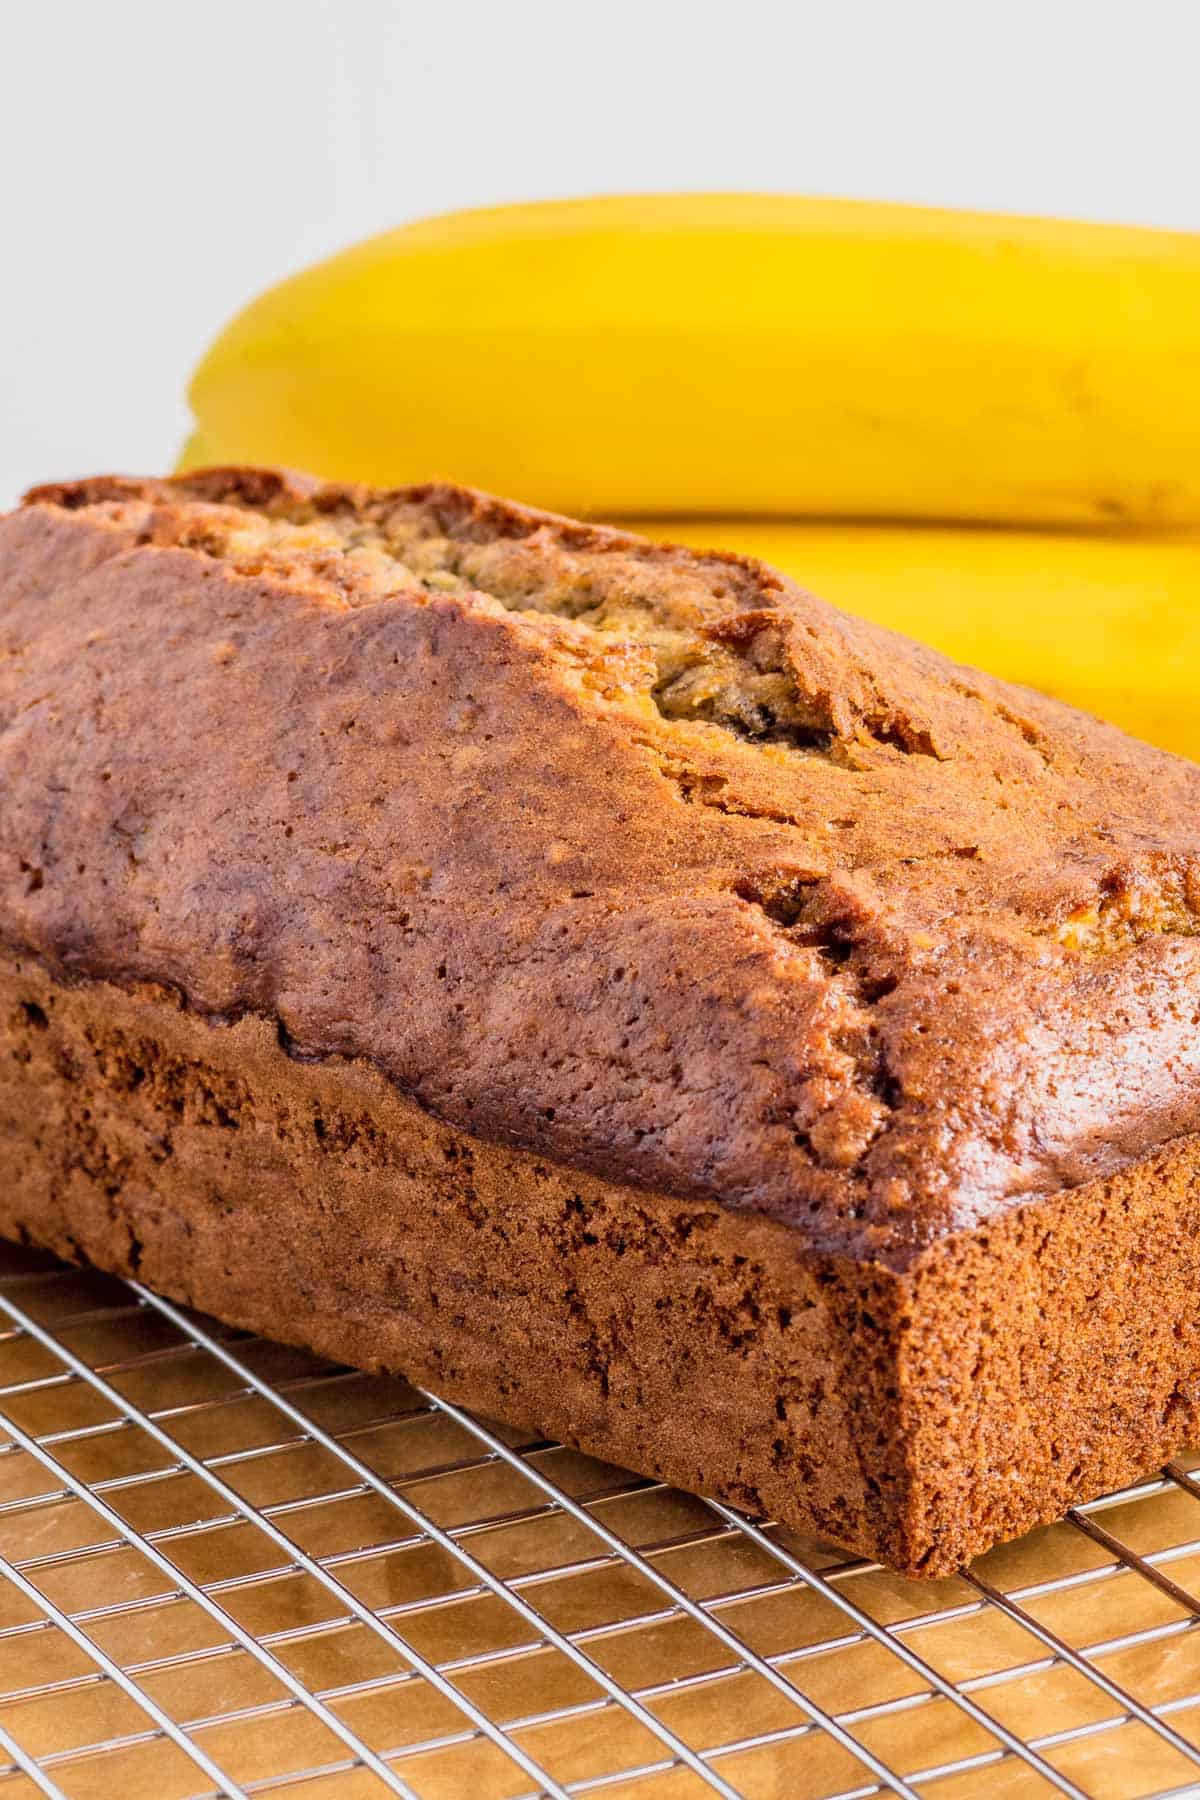 Dairy Free Banana Bread right after baking